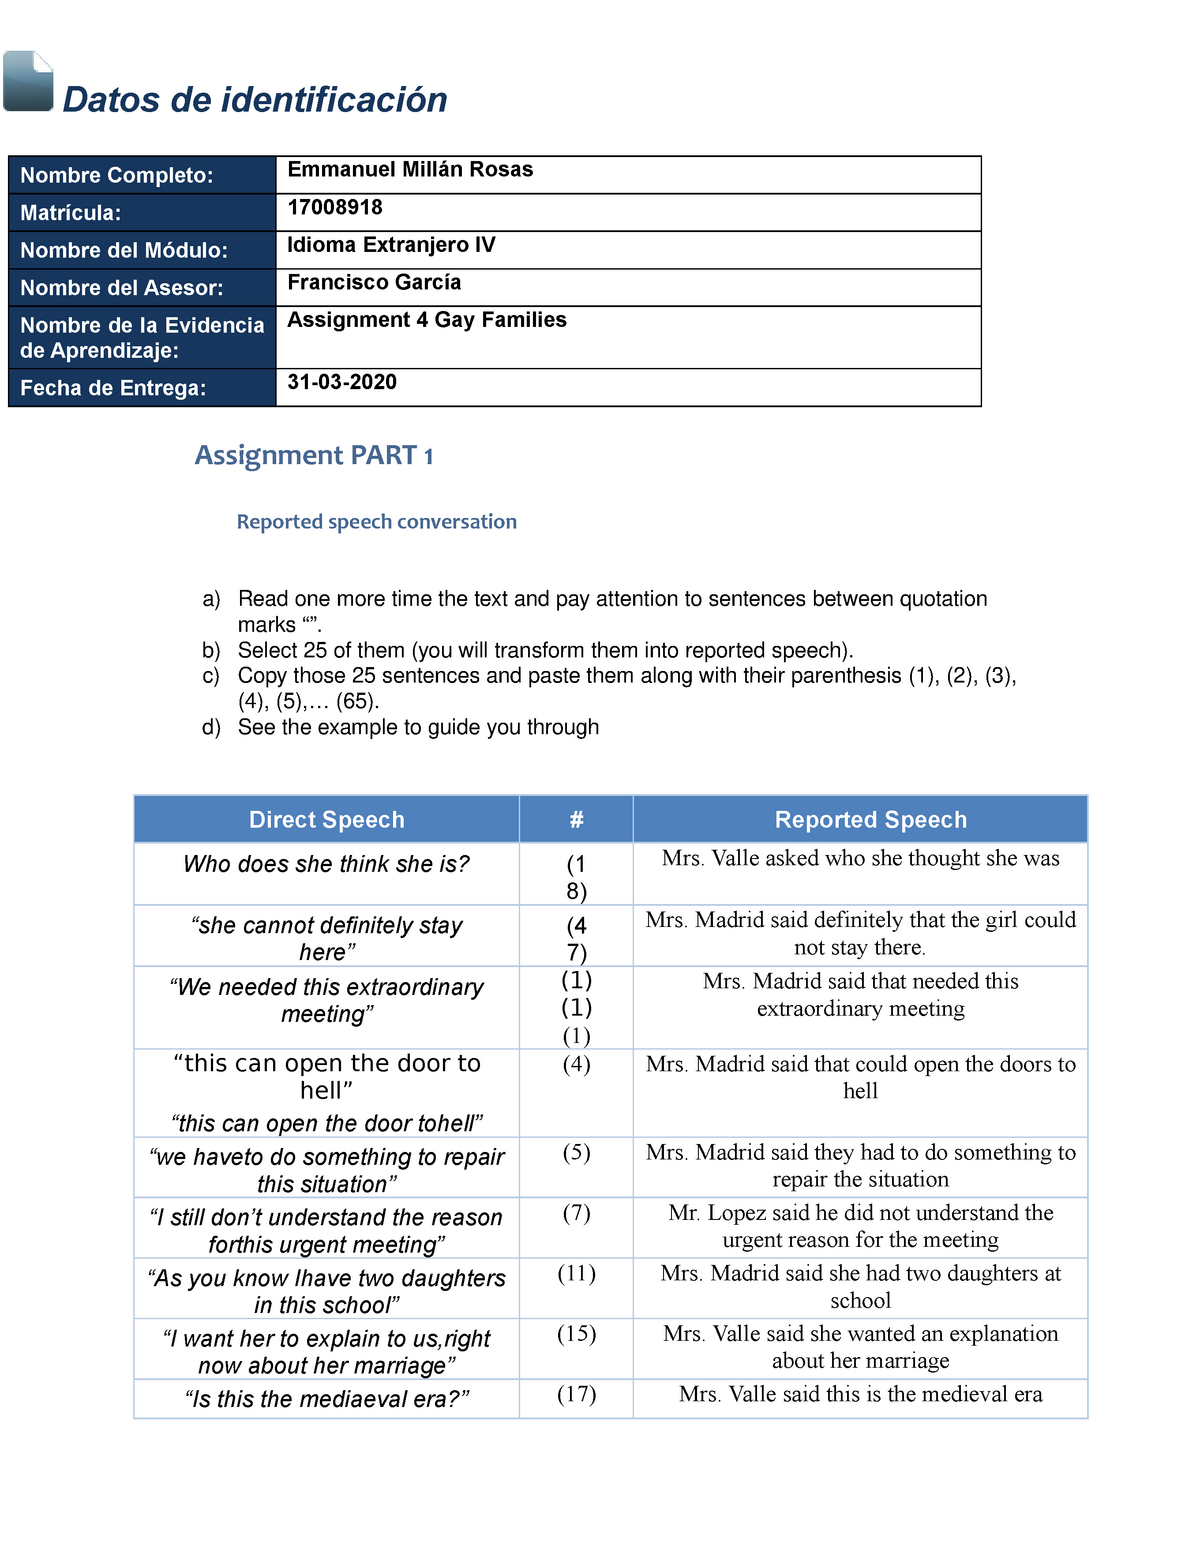 assignment 4 gay families scribd